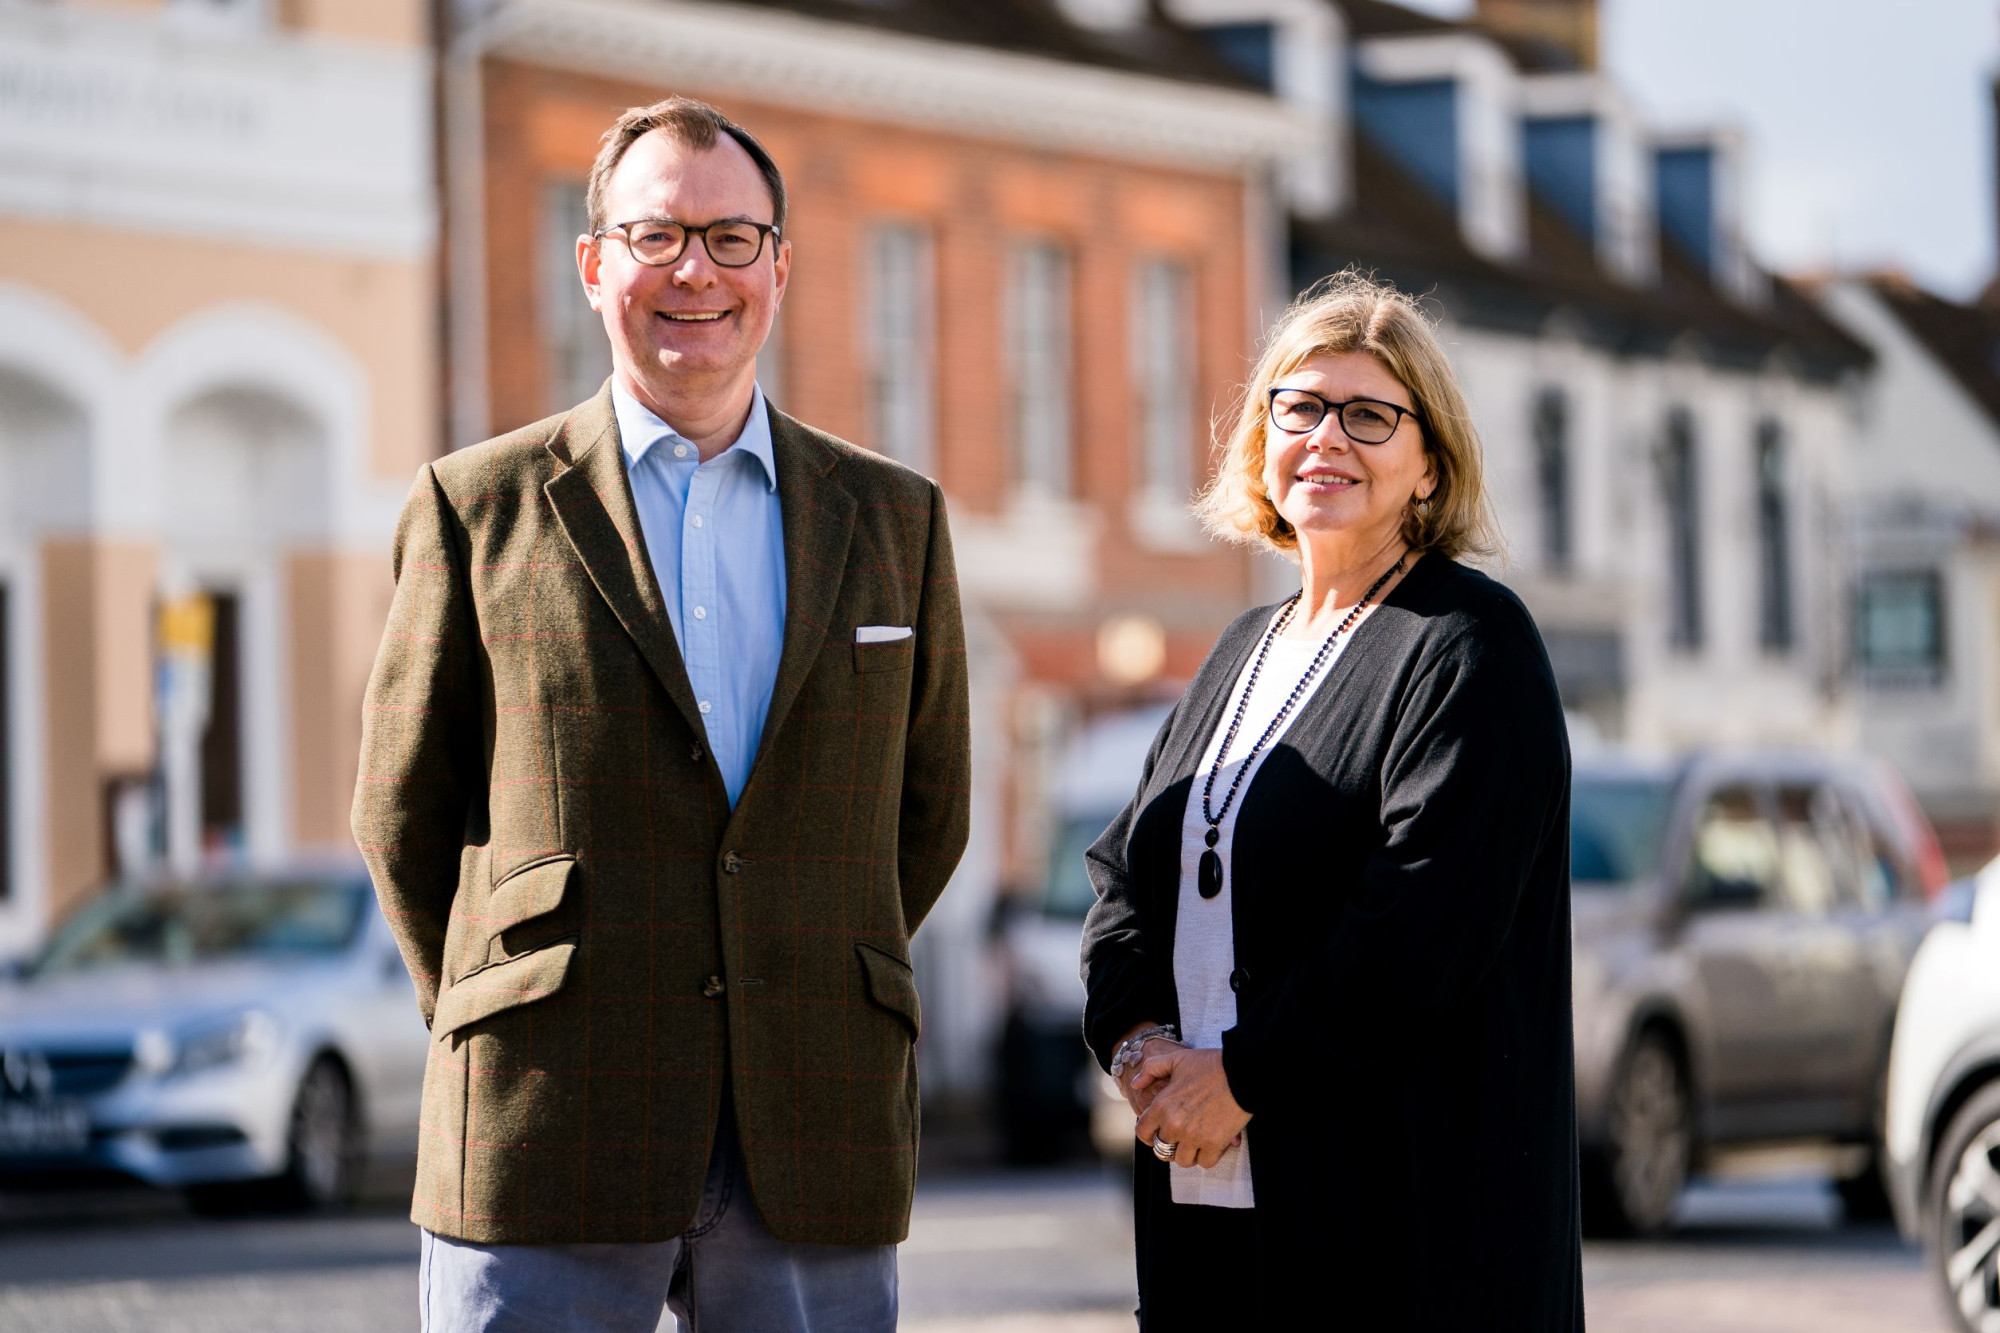 Paul Willans and Nicky Mowat of AJB Wealth enjoy their new surroundings in Alresford, Hampshire